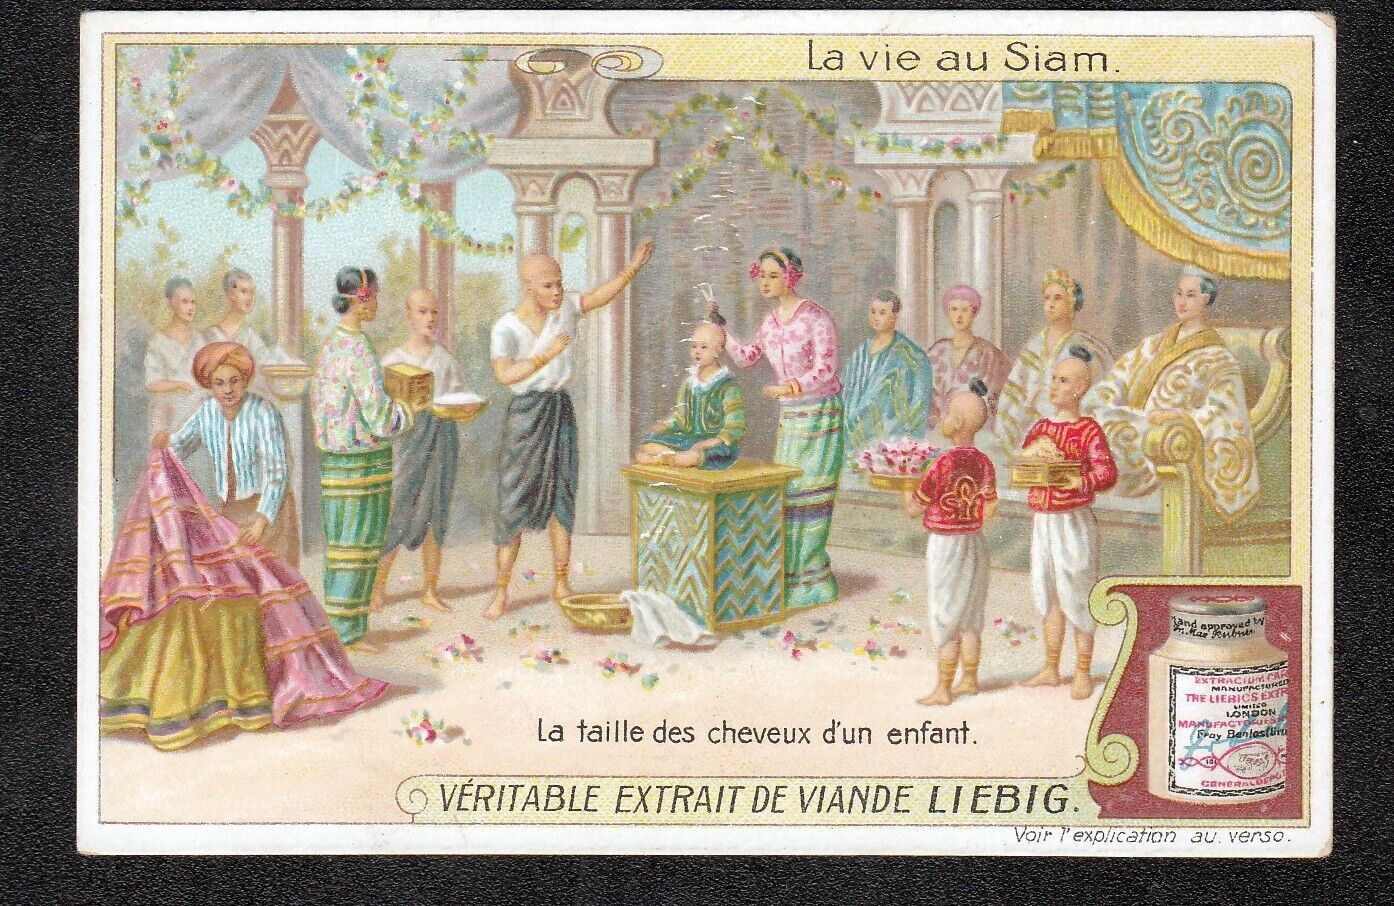 THAILAND: Vintage 1909 SIAM Trade Card CEREMONY FIRST HAIRCUT